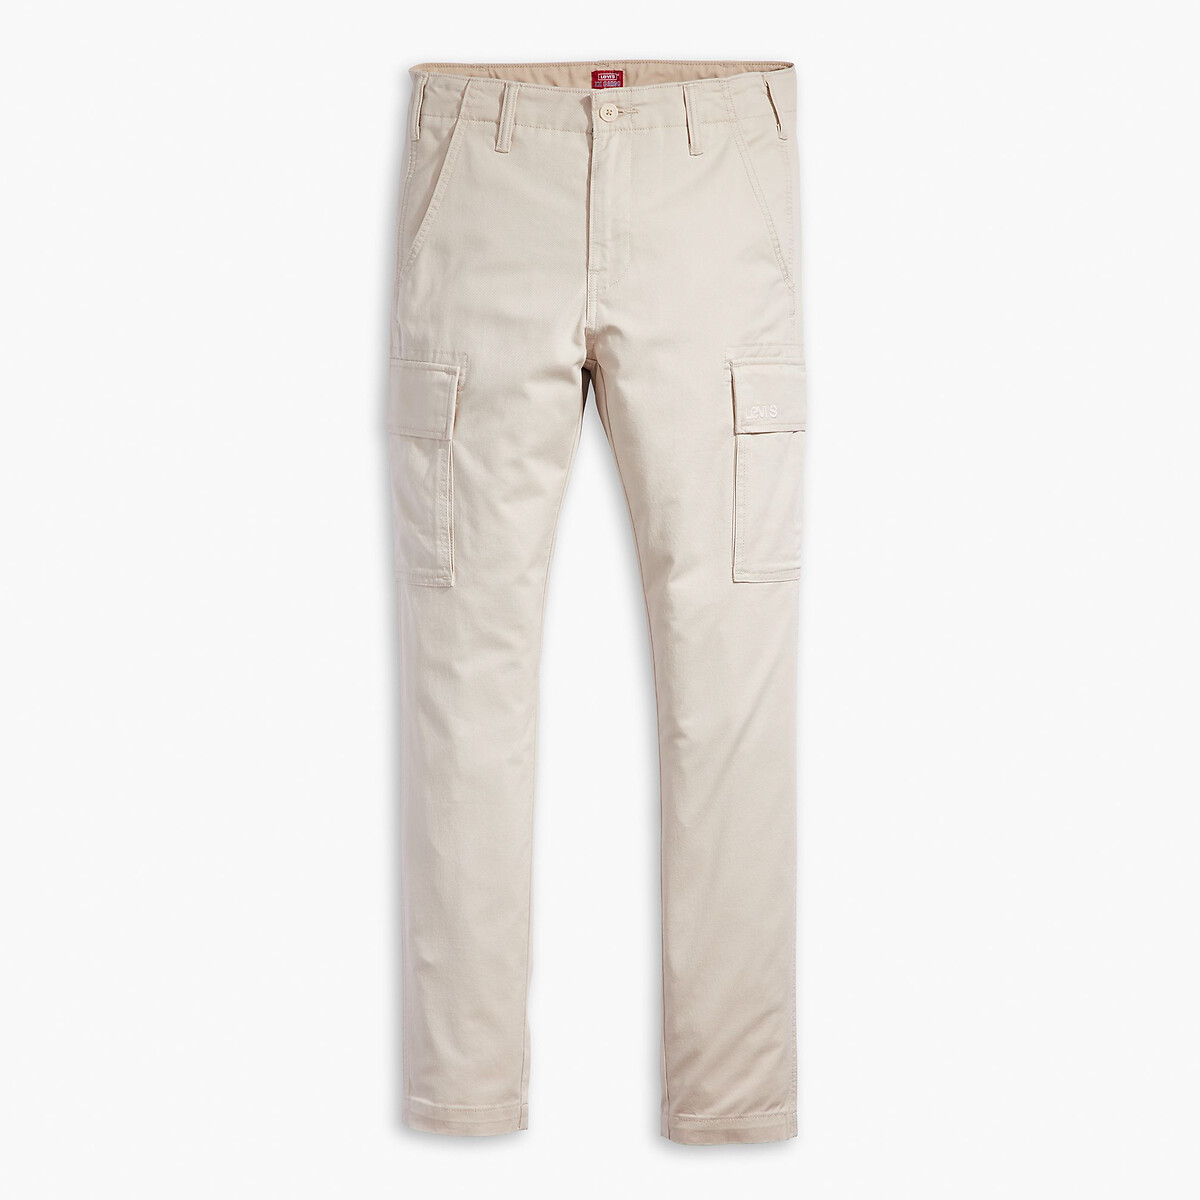 Image of Xx Cotton Cargo Chinos in Slim Fit